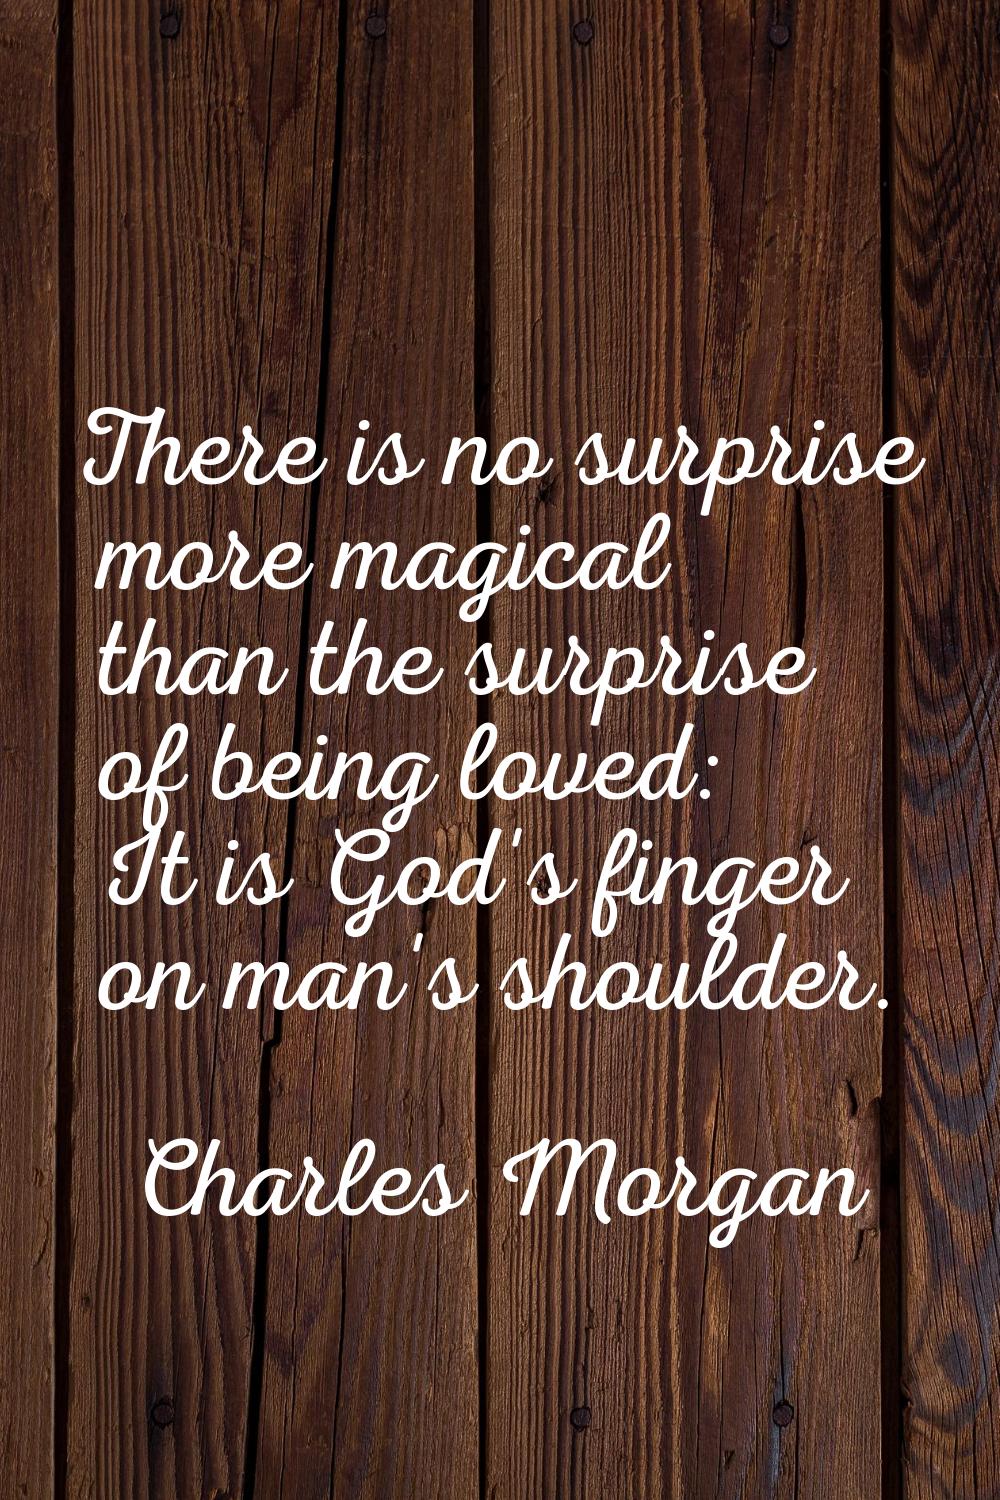 There is no surprise more magical than the surprise of being loved: It is God's finger on man's sho